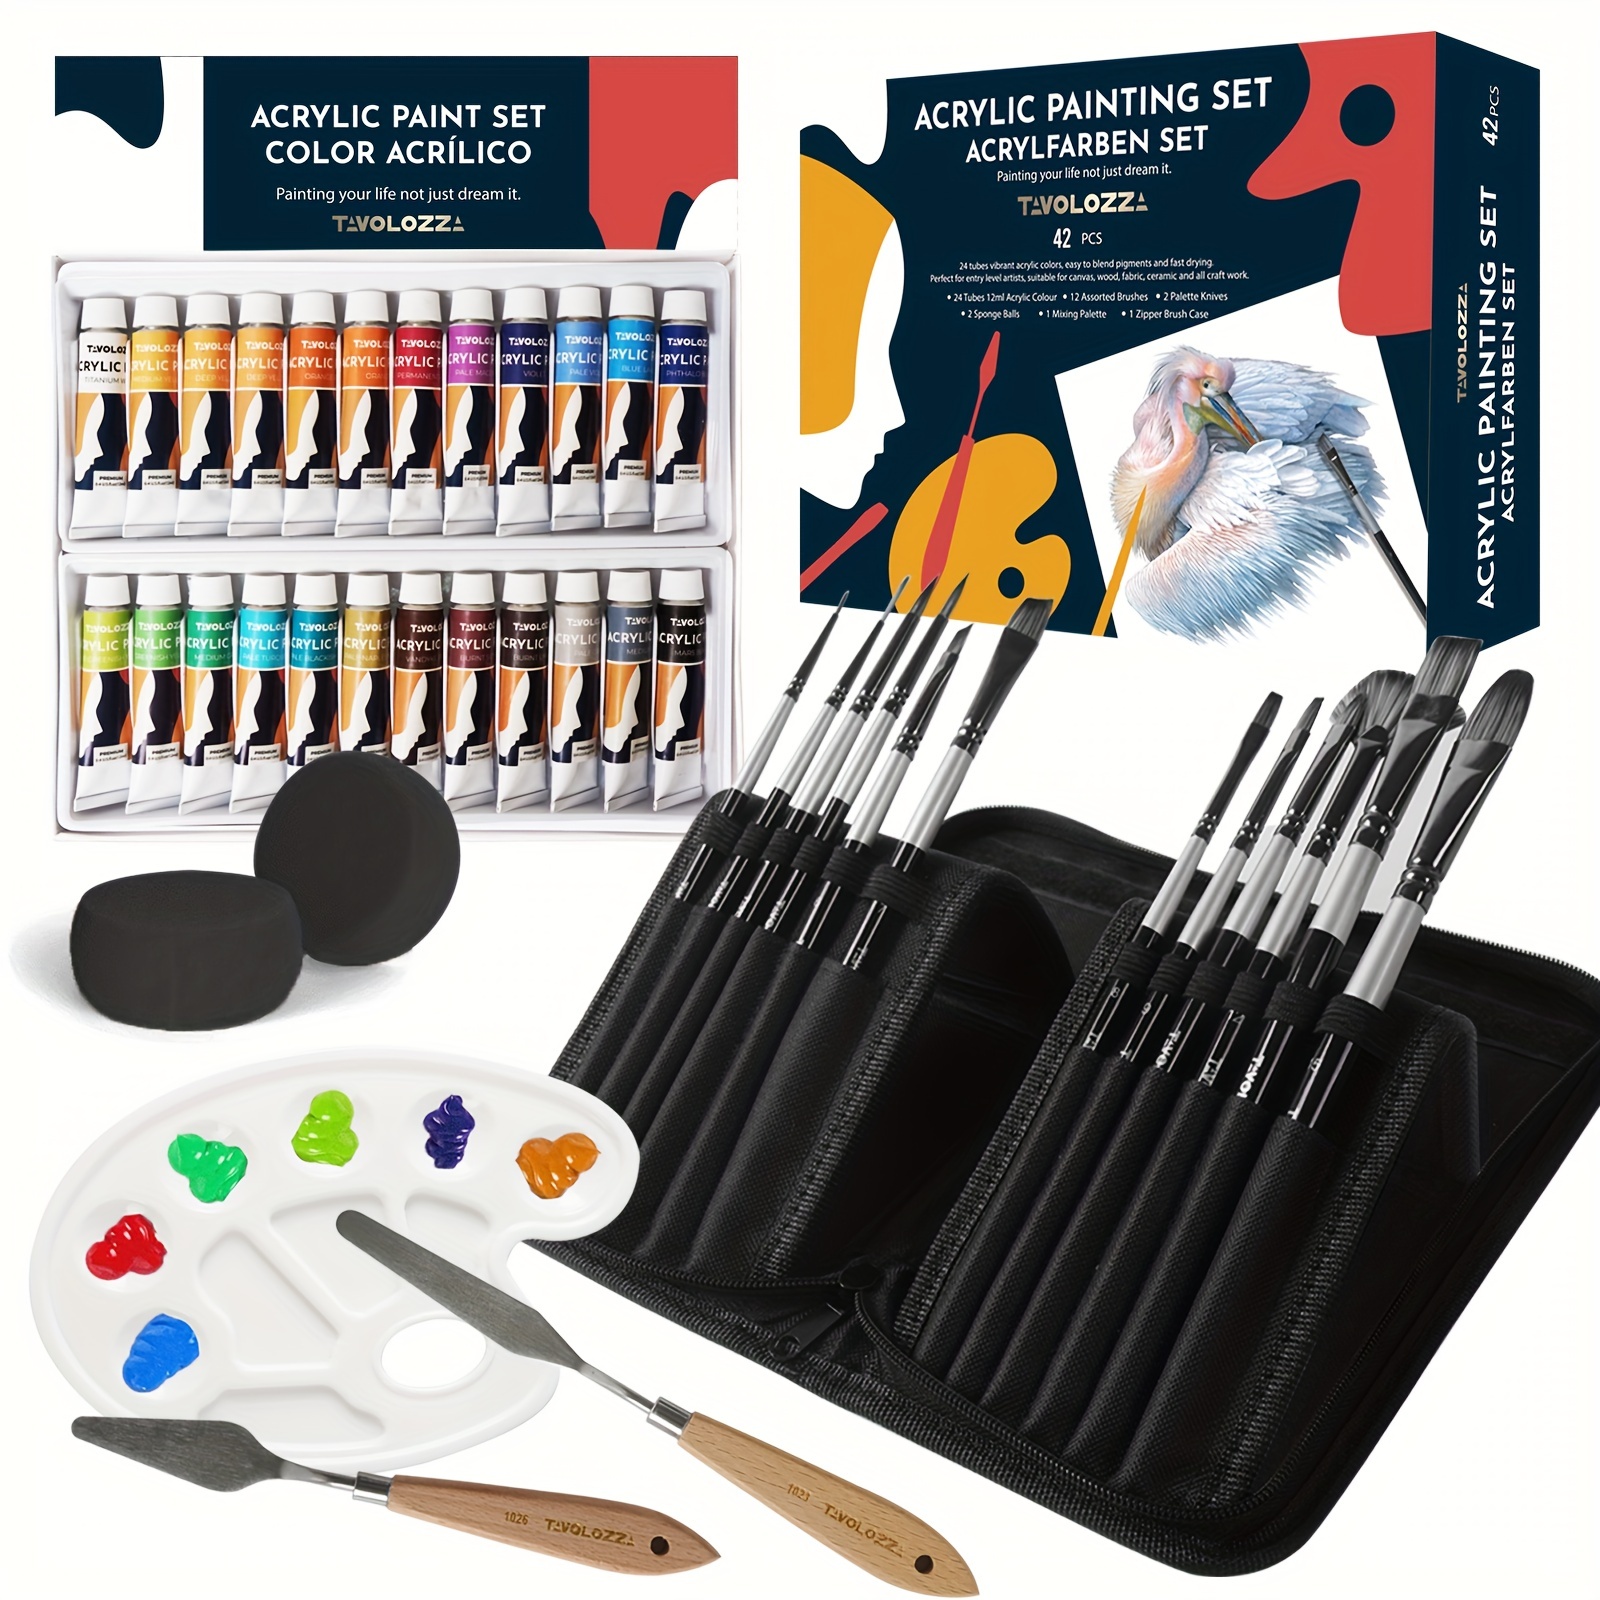 Acrylic Painting Supplies Kit, Acrylic Color Painting